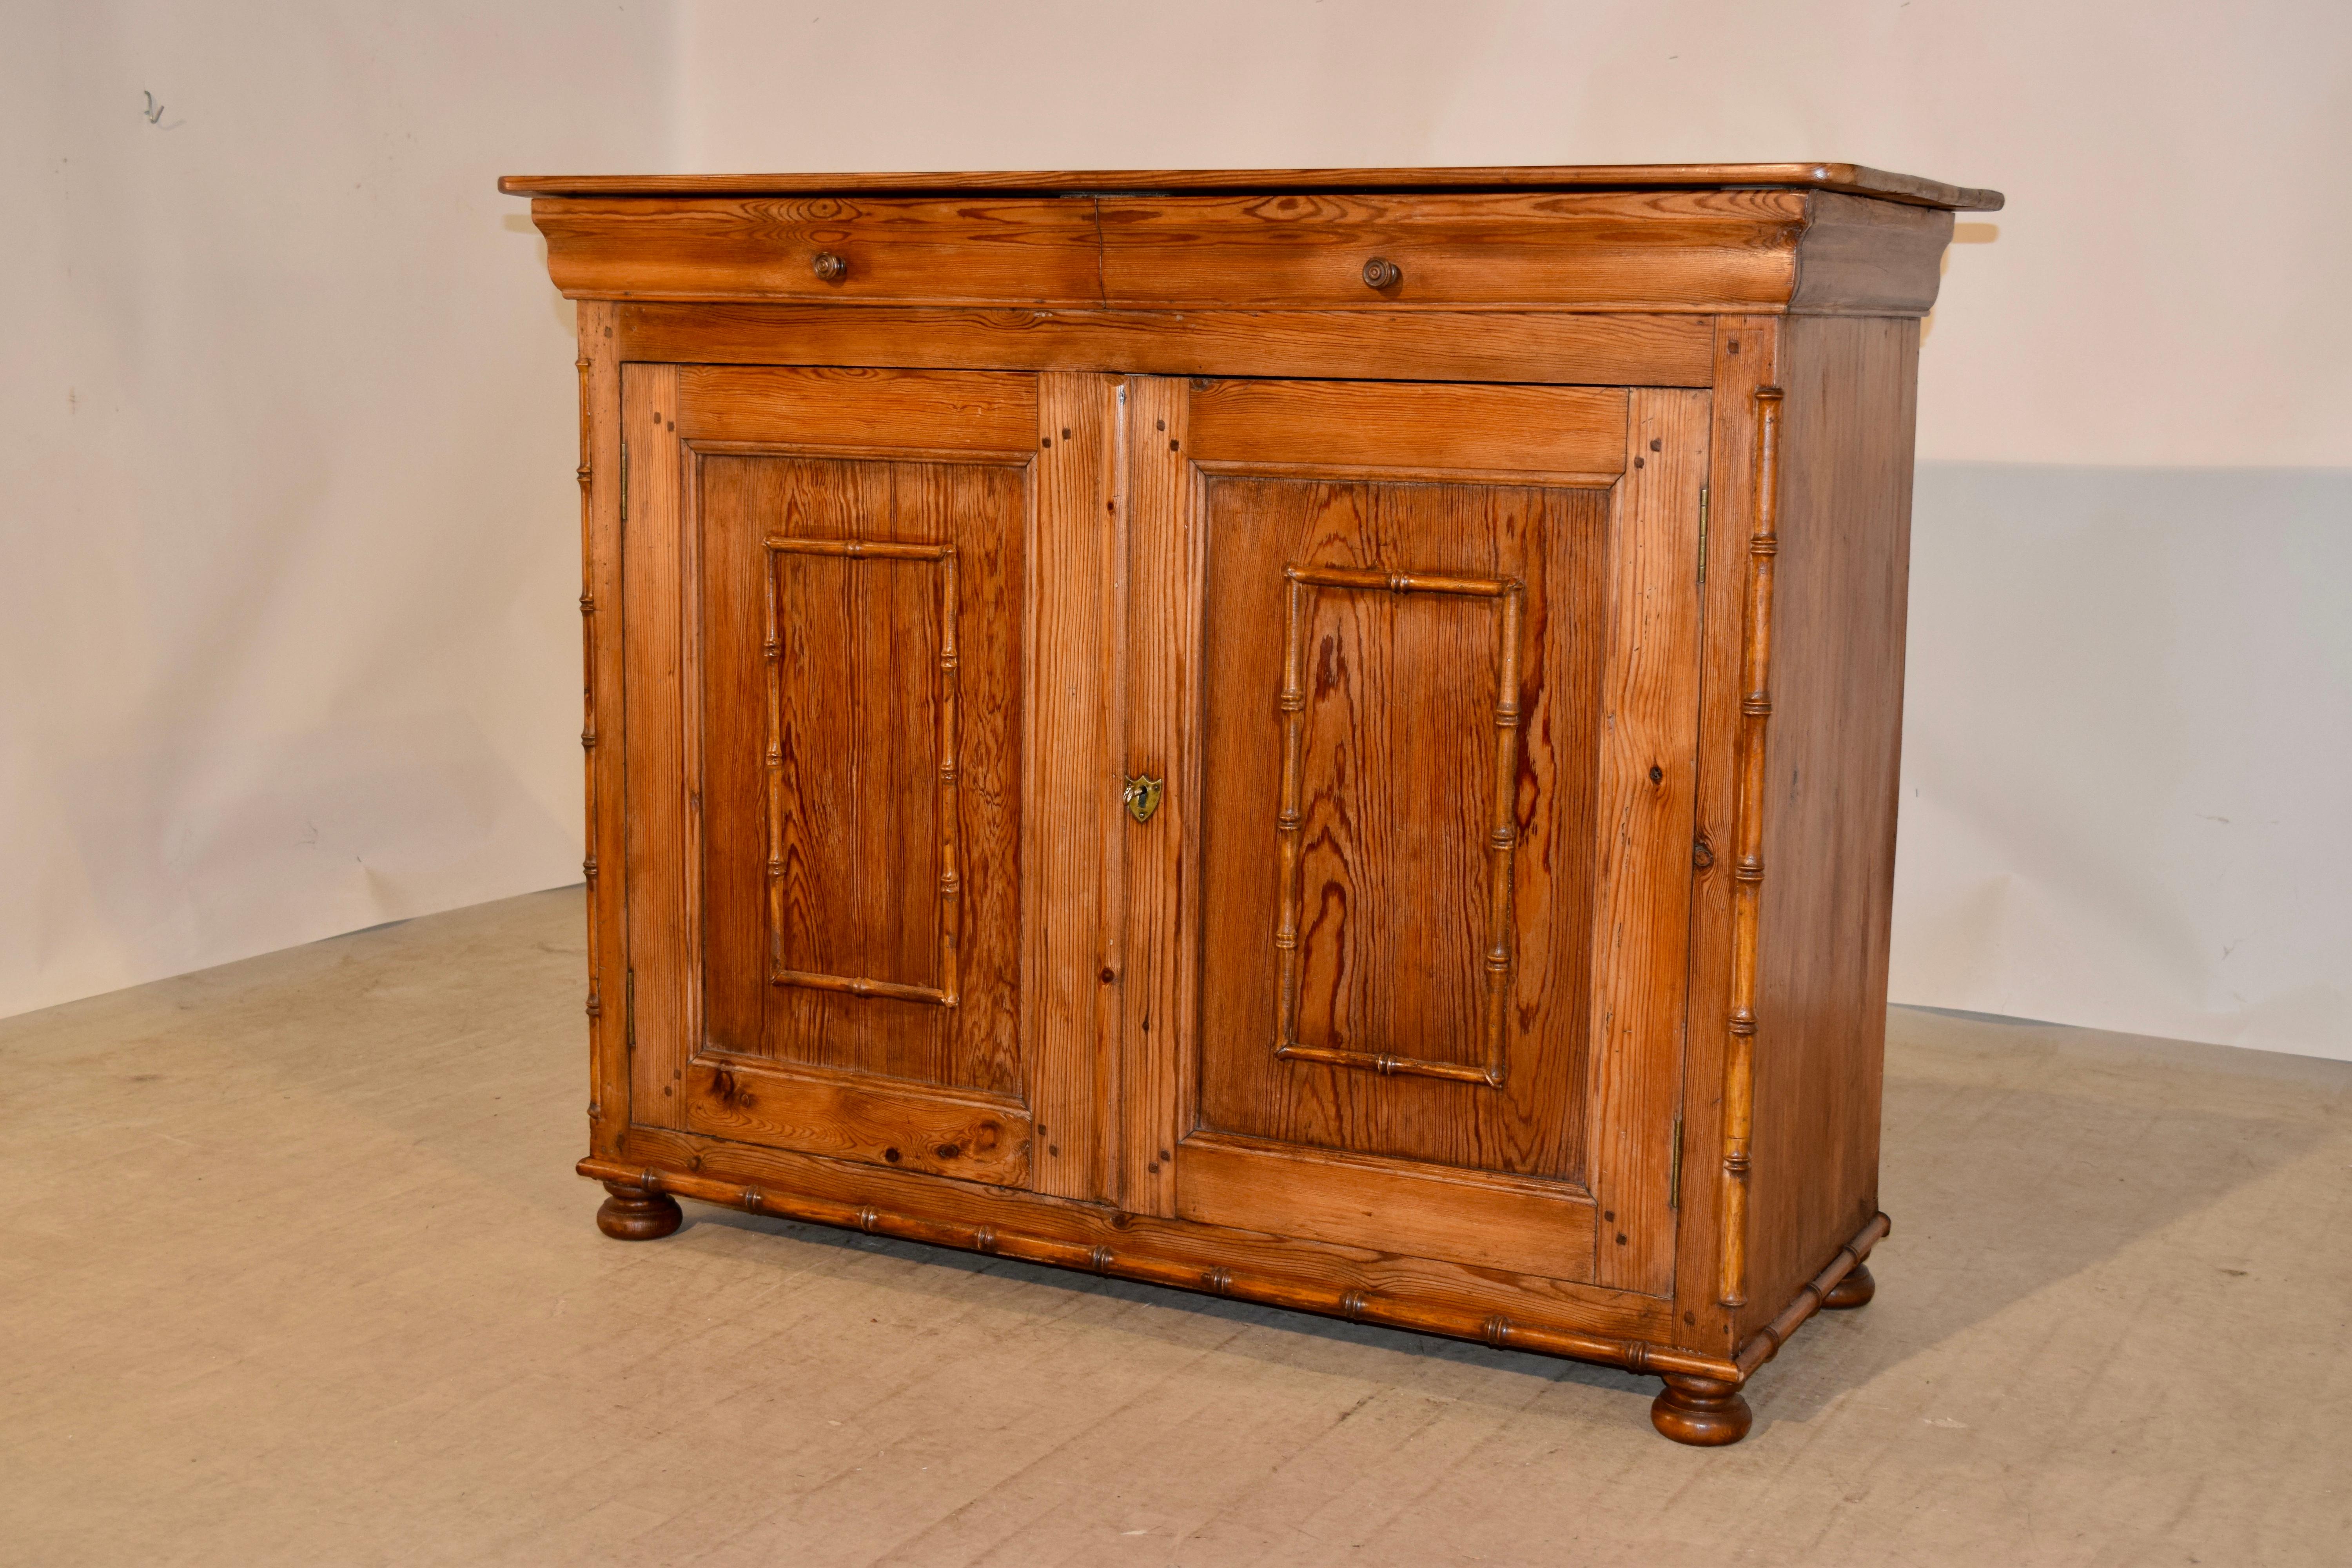 19th century French buffet in the Louis Philippe style made from pine. The top is wonderfully grained and follows down to two drawers over two doors which open to reveal storage. The piece is decorated with faux bamboo turned moldings for a warm